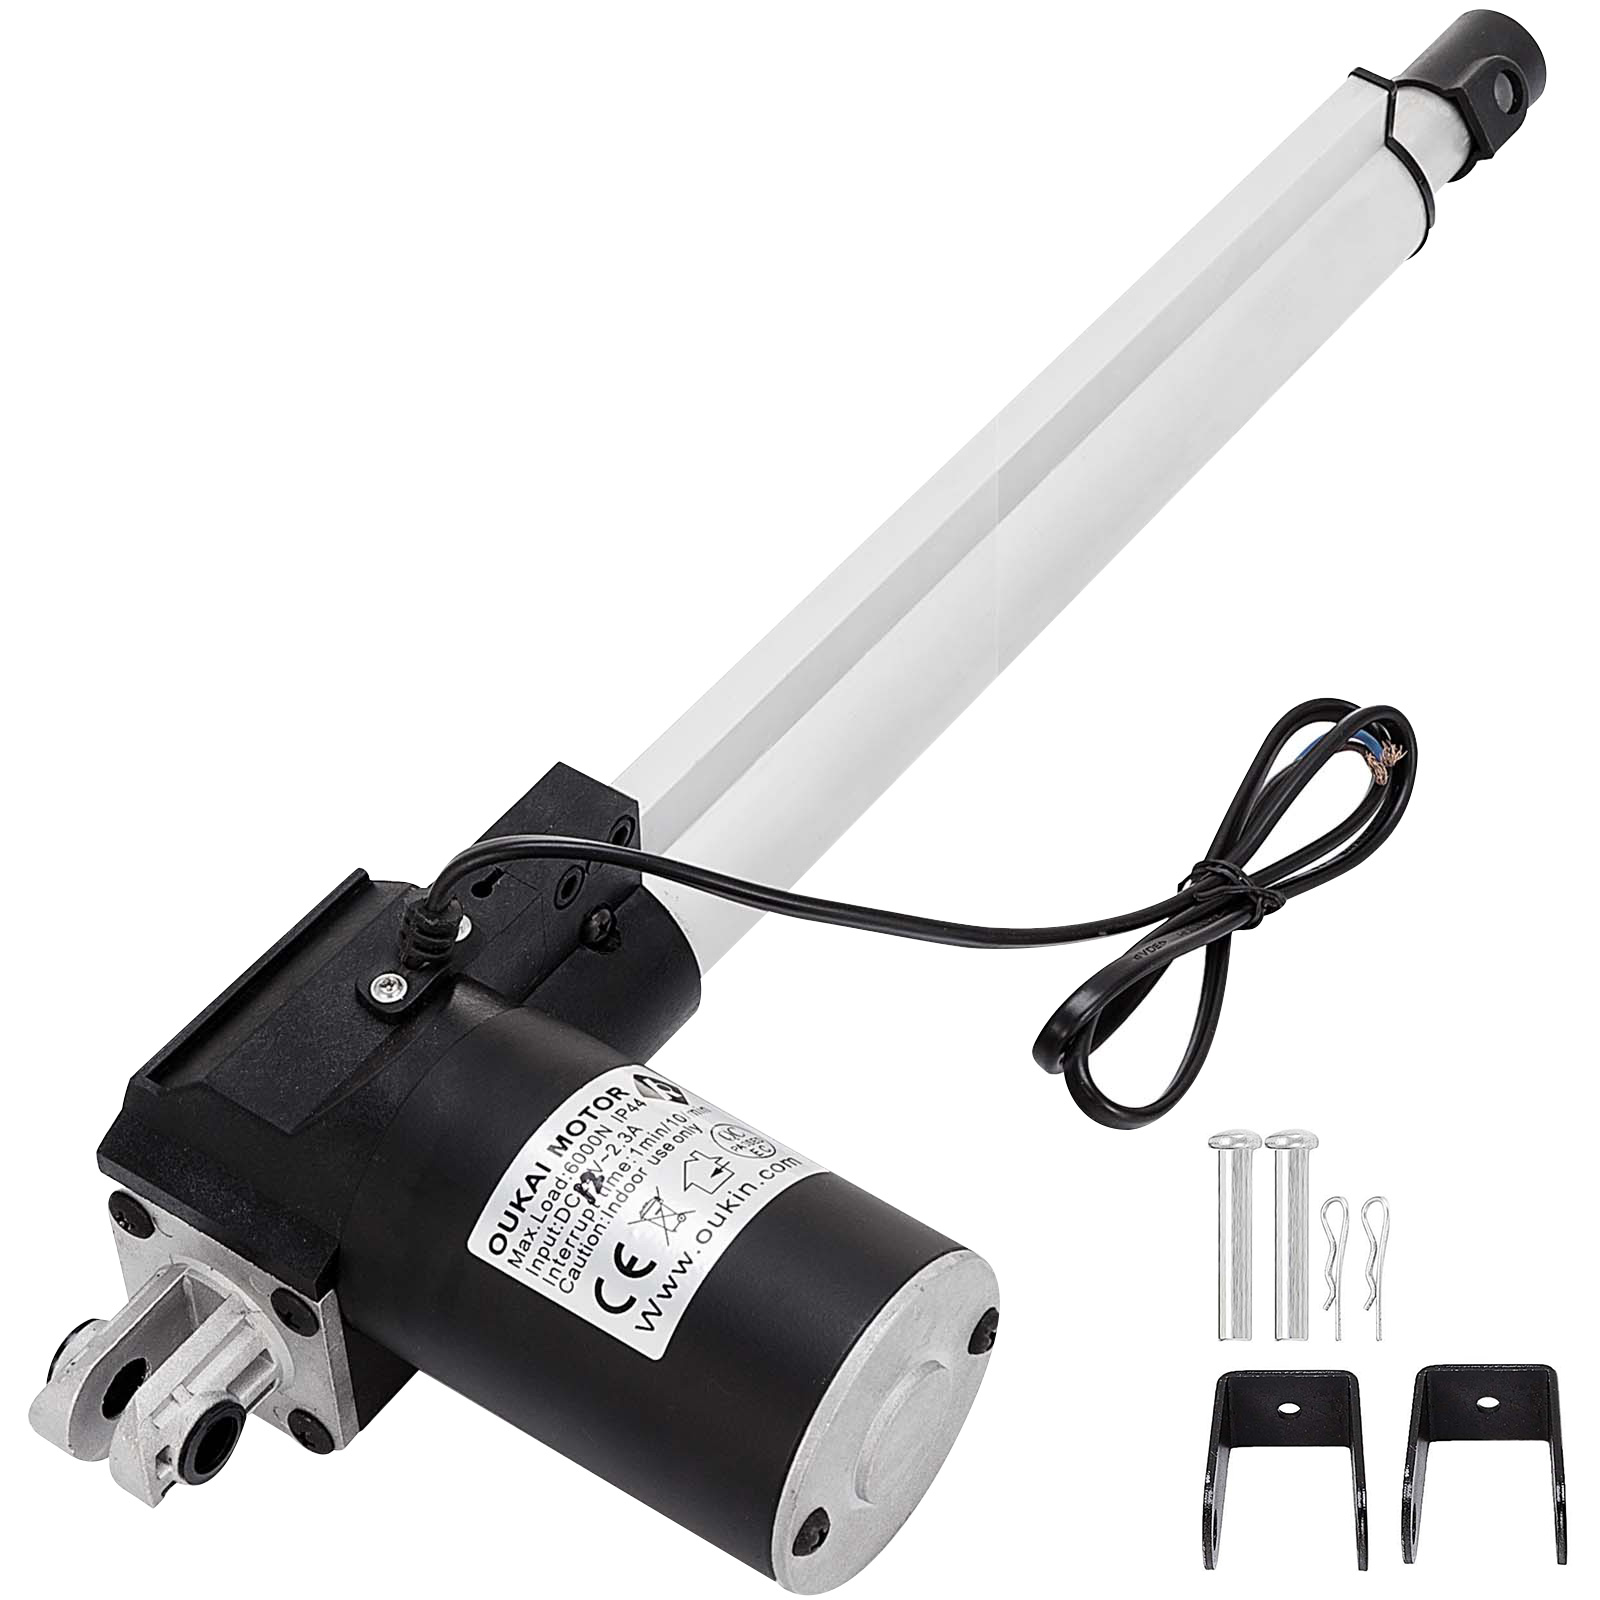 12" Stroke Linear Actuator 1320LBS Cylinder Lift Electric DC Motor Stroke Length 